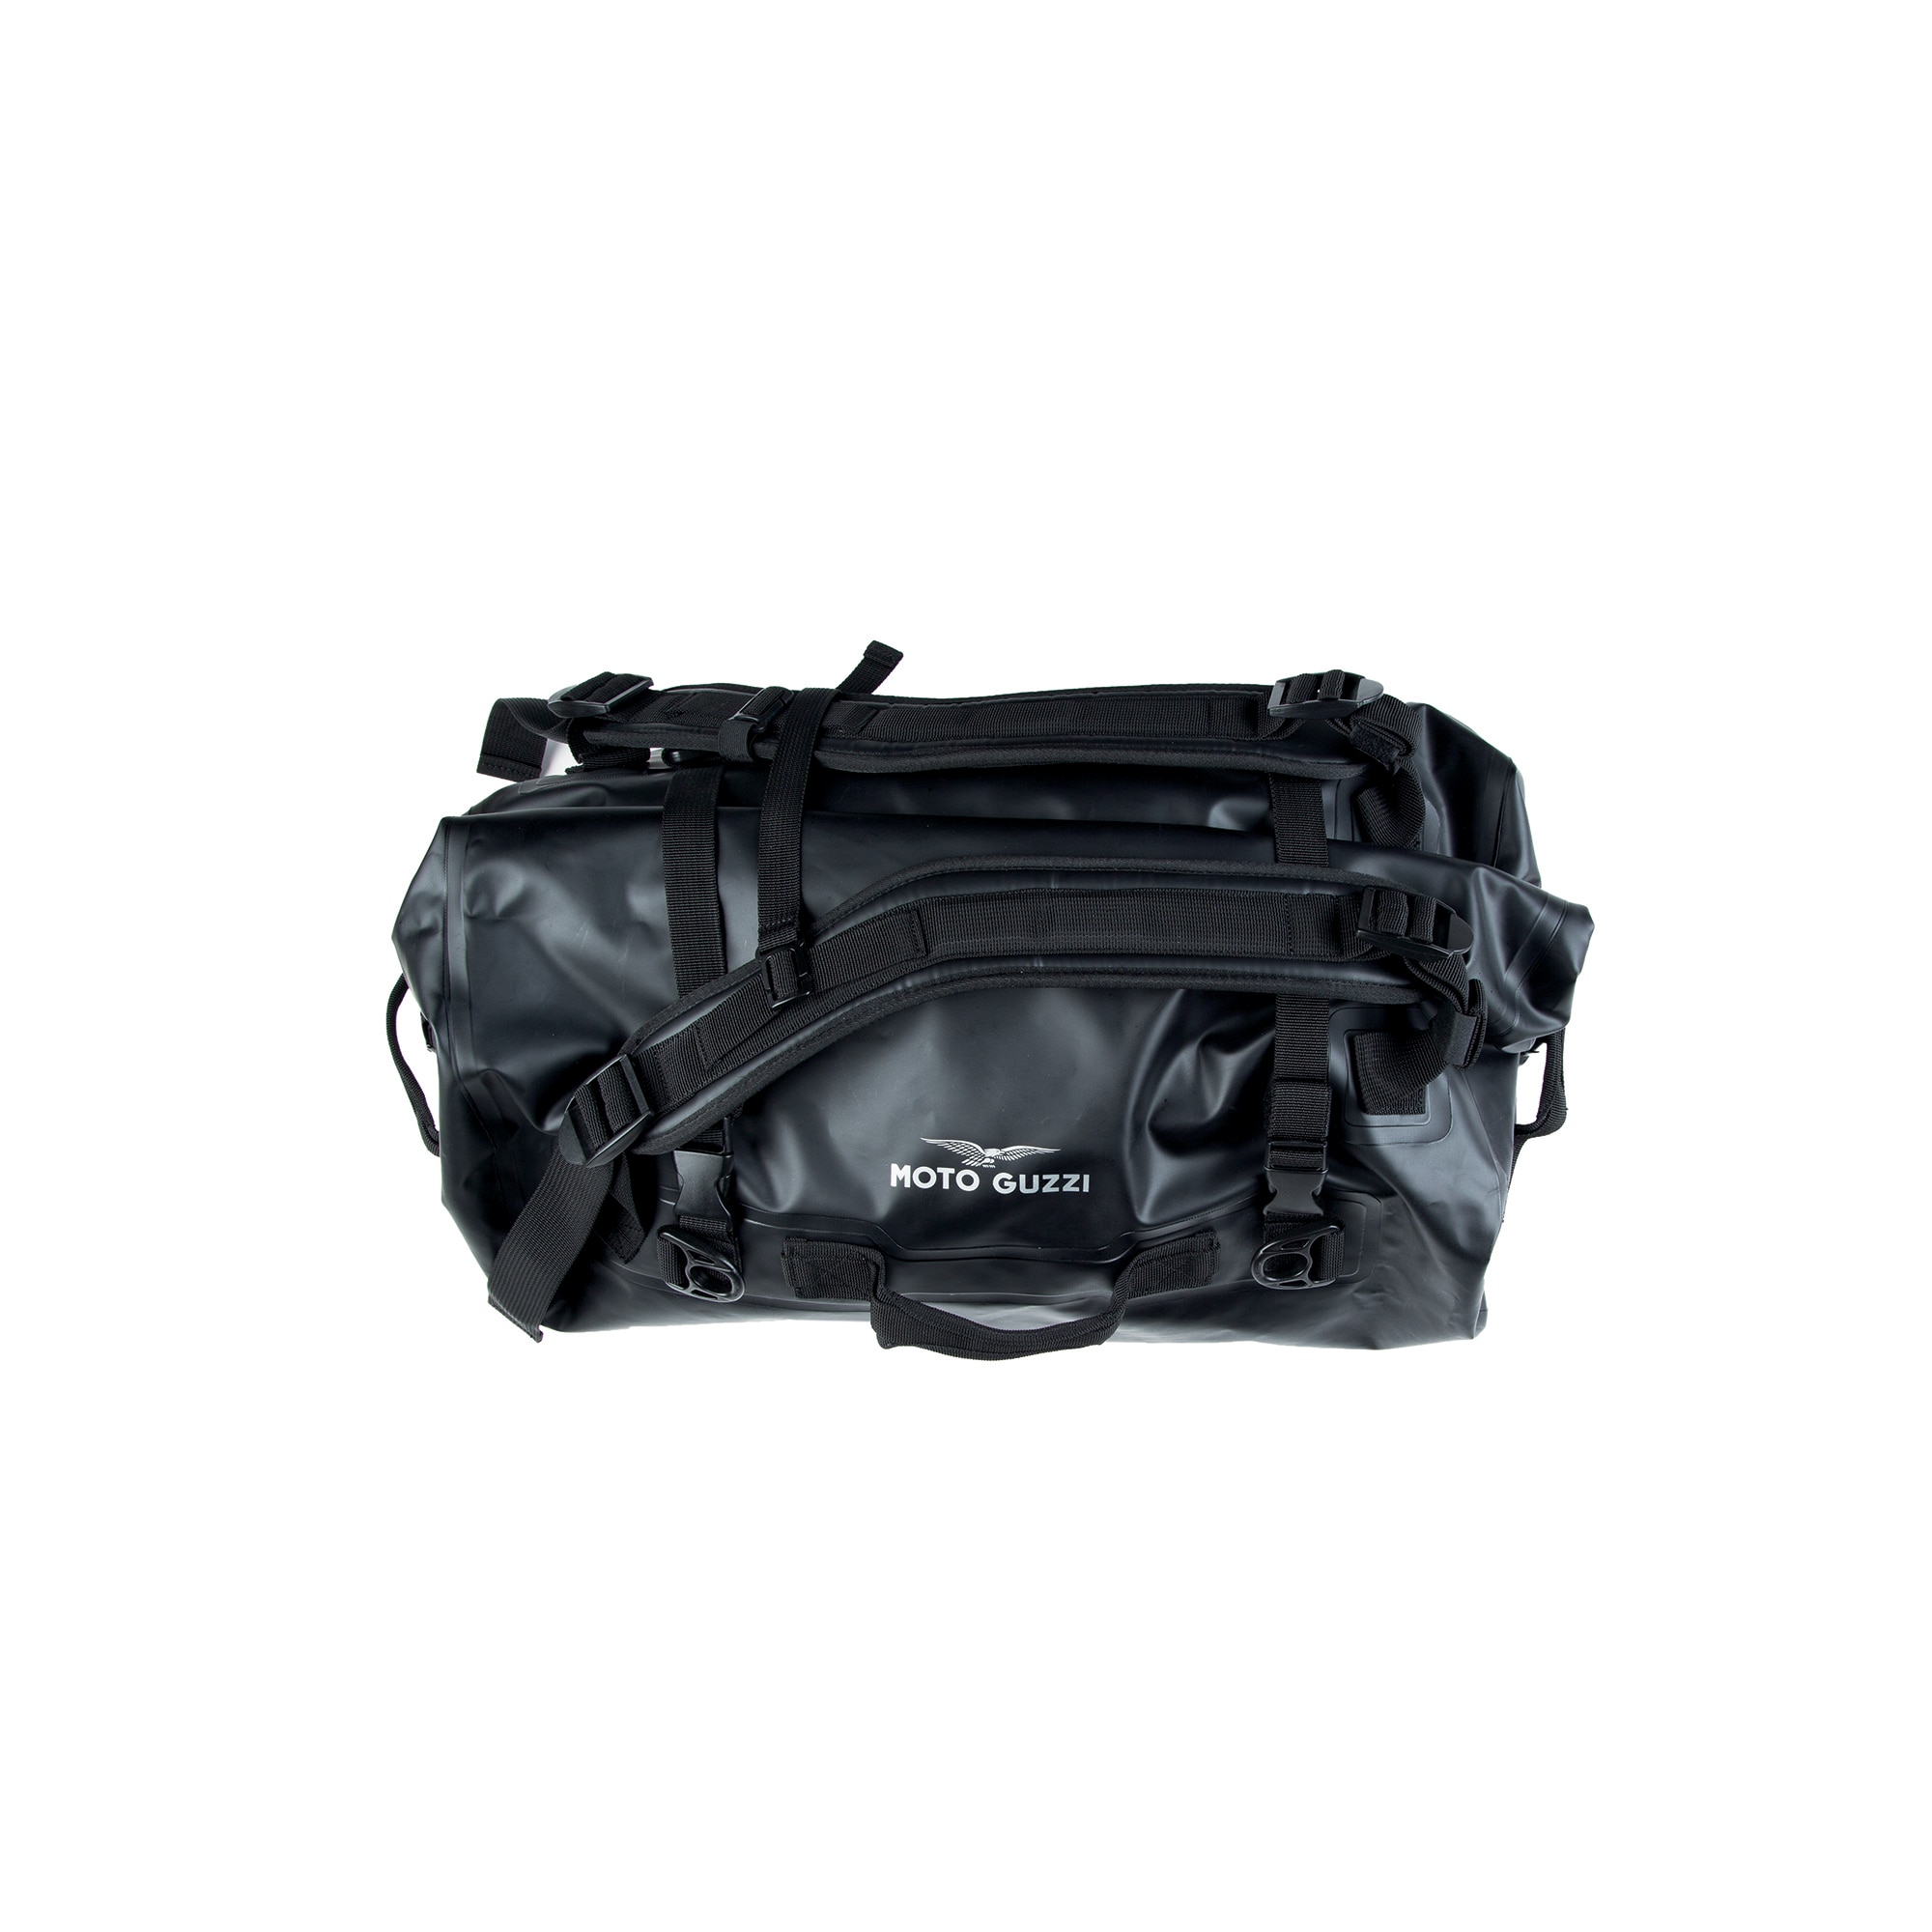 DRY BAG for motorcycles 606523m | Guzzi motorcycles